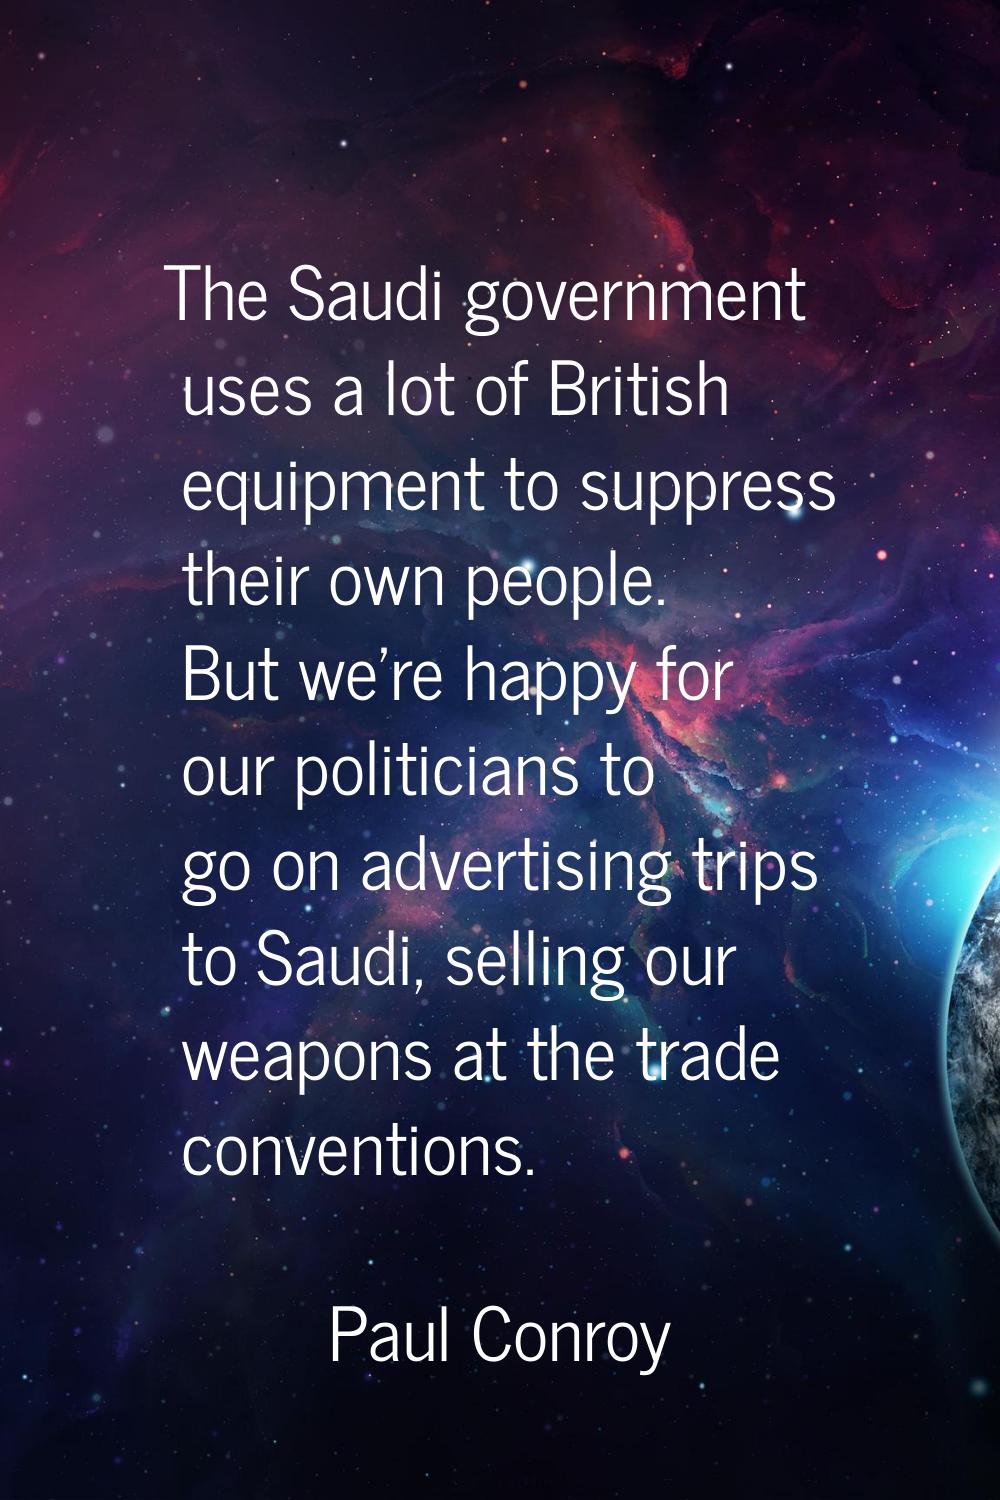 The Saudi government uses a lot of British equipment to suppress their own people. But we're happy 